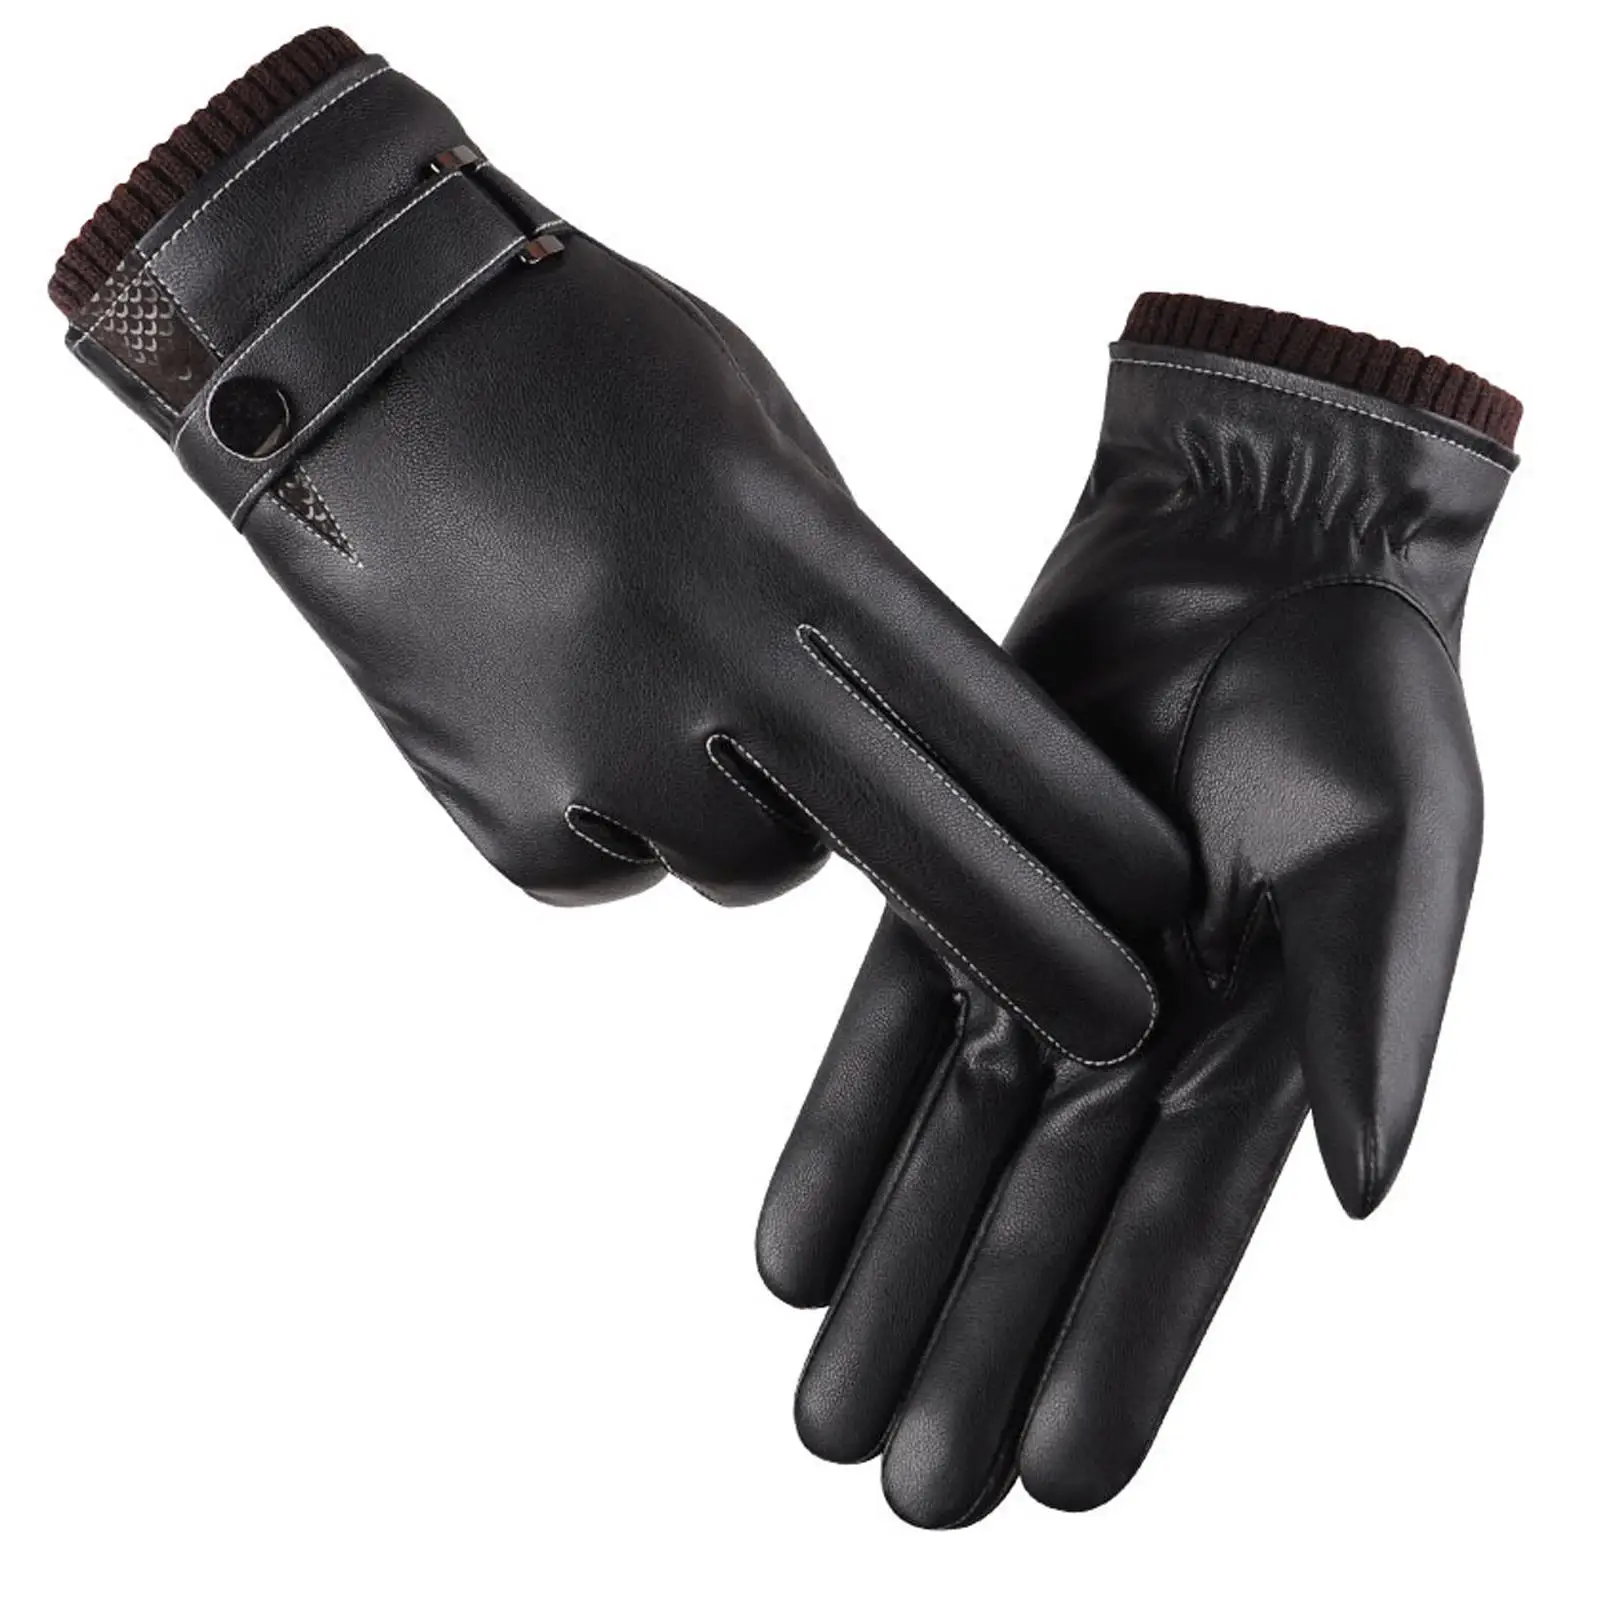 Touchscreen Gloves PU Leather Full Finger Thermal Winter Gloves for Skiing